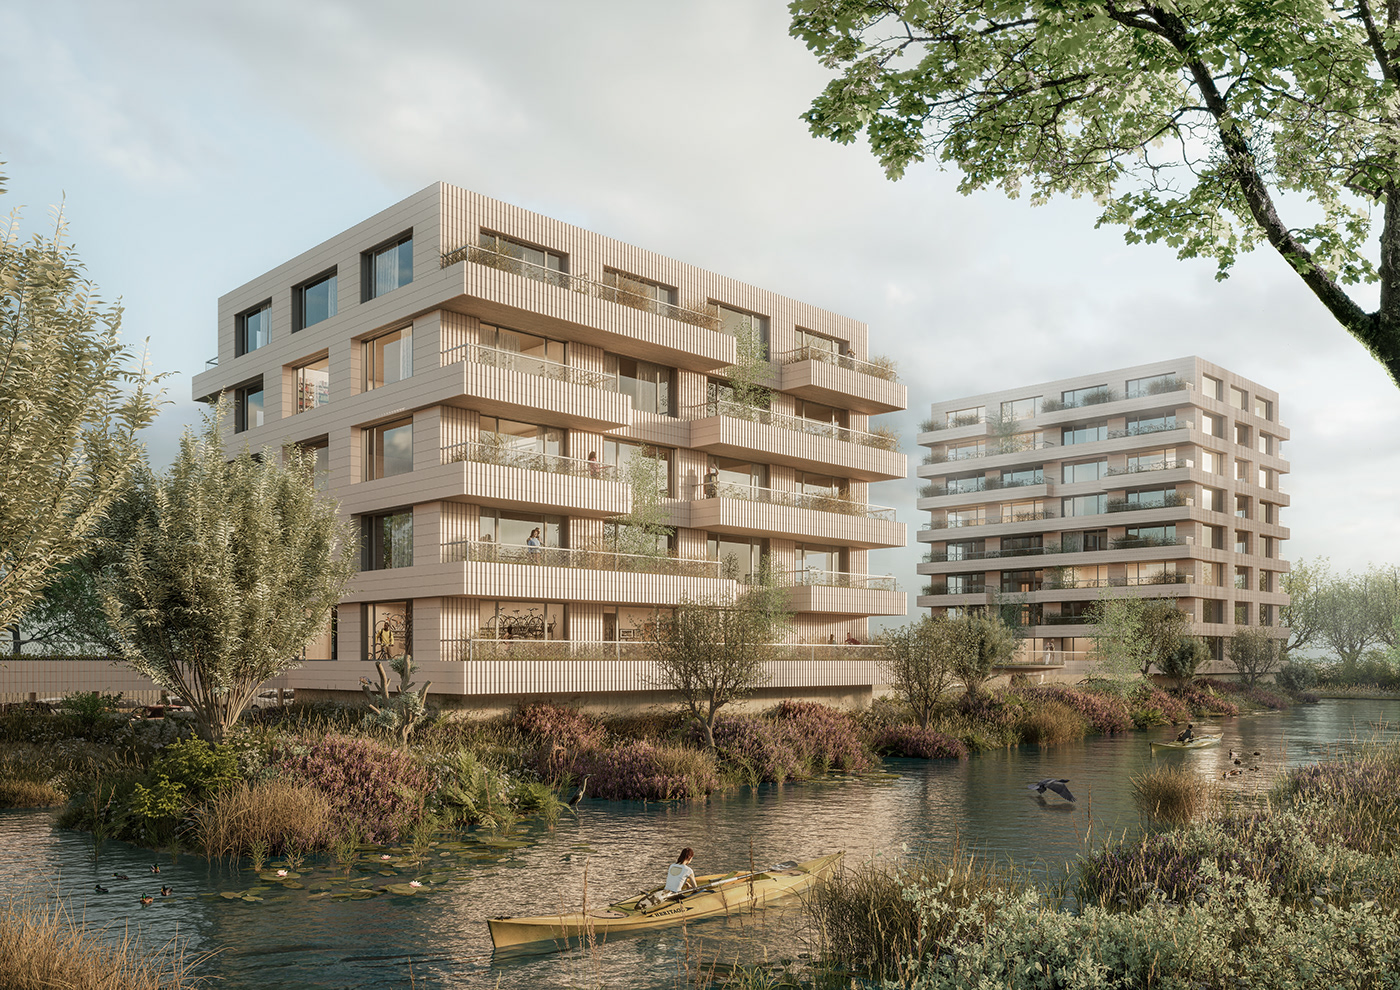 architectural visualization of housing competition proposal showing two building blocks by the river